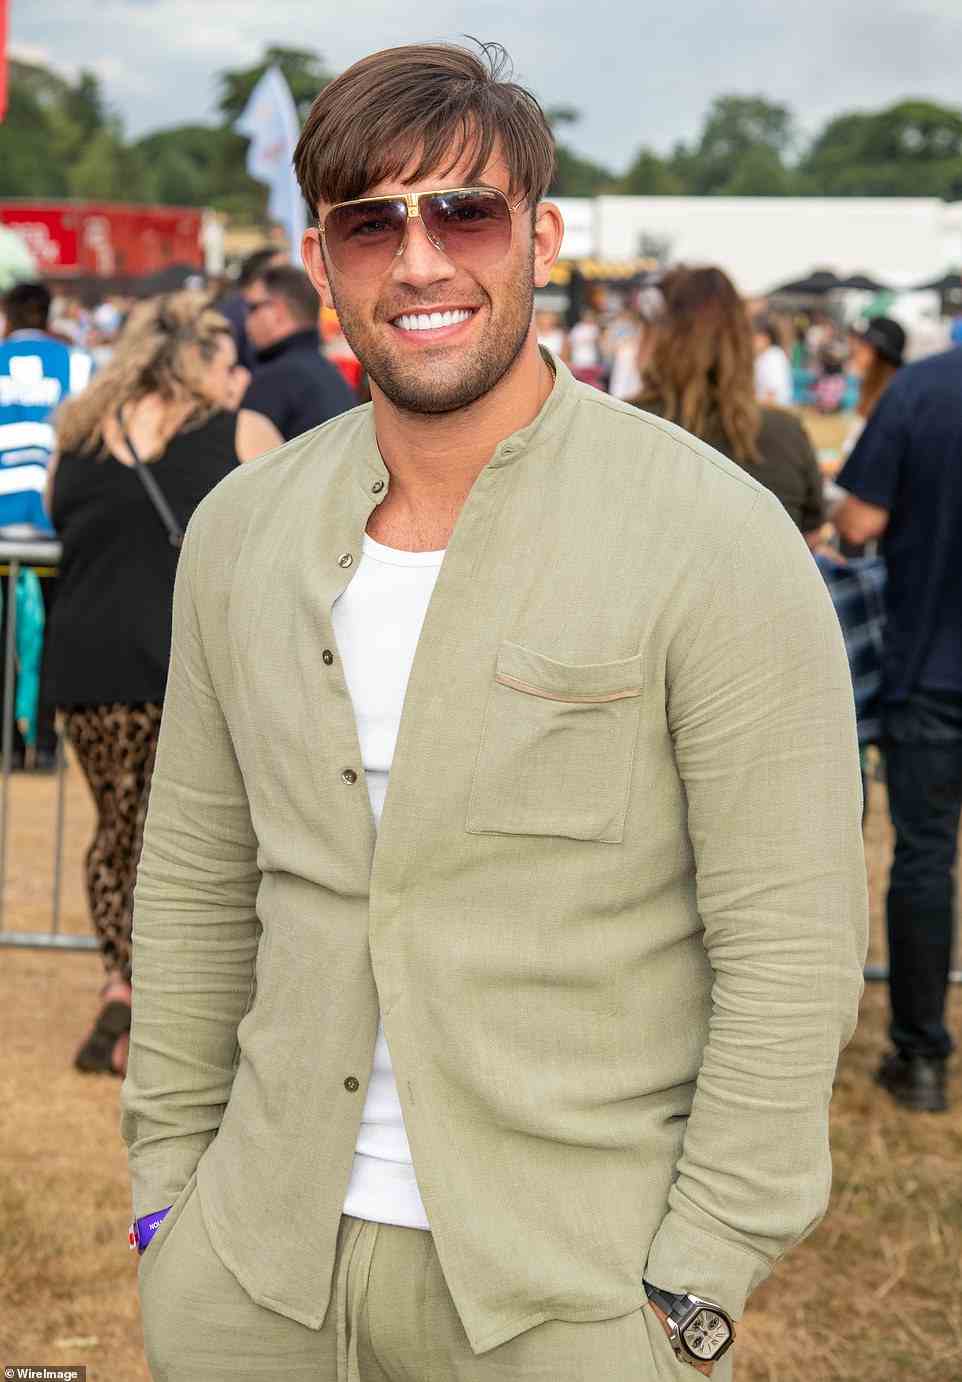 Don't mind me: But former Love Island winner Jack Fincham's flashy grin ensured he caught the eye on Monday